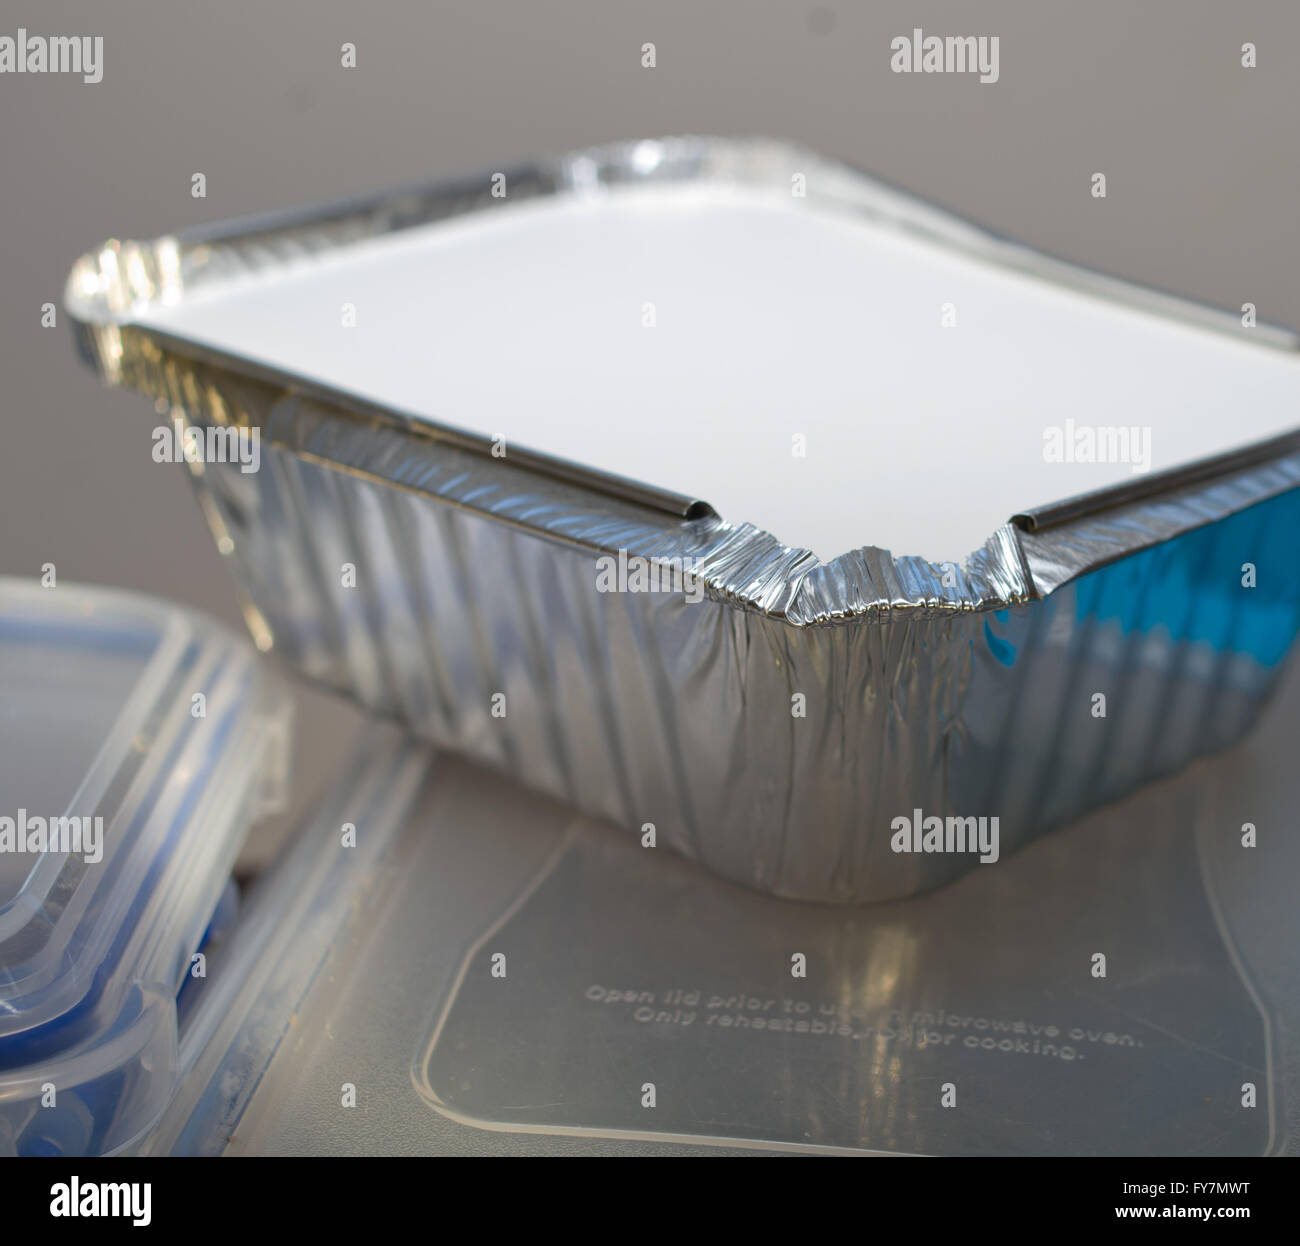 Foil takeaway food container Stock Photo